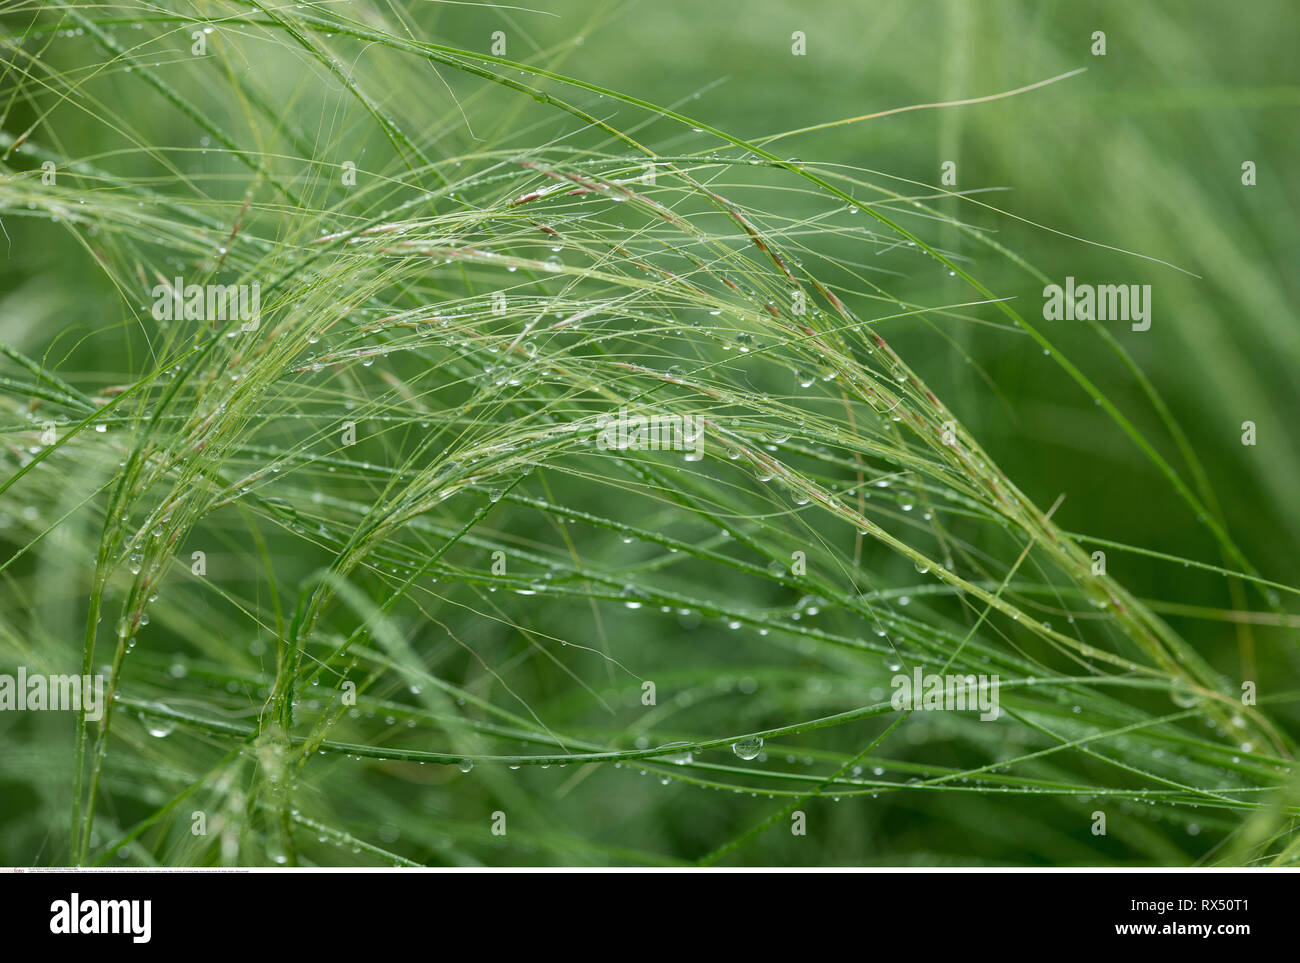 botany, feather grass in the rain, Caution! For Greetingcard-Use / Postcard-Use In German Speaking Countries Certain Restrictions May Apply Stock Photo